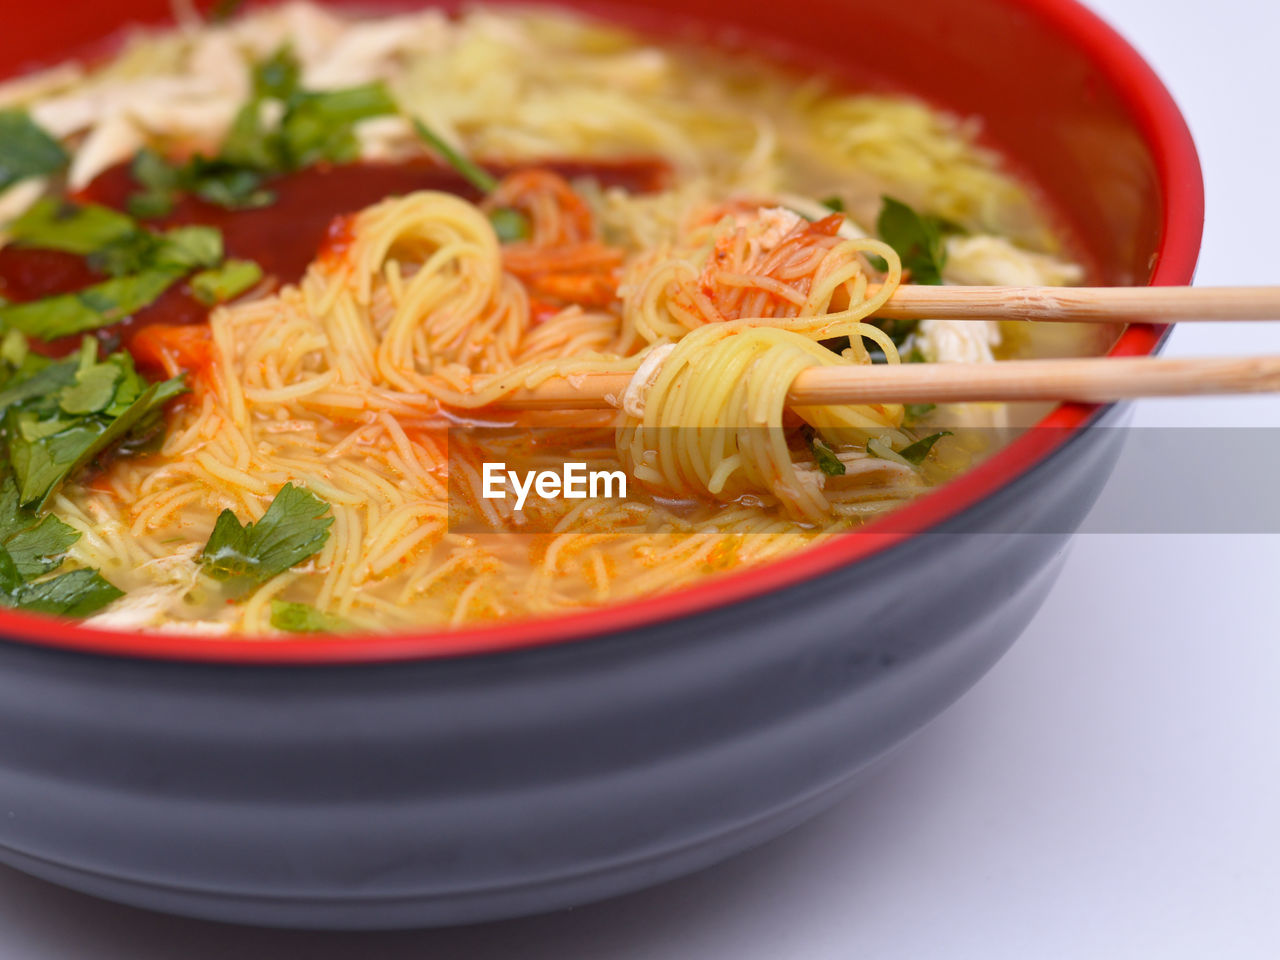 CLOSE-UP OF SOUP WITH NOODLES